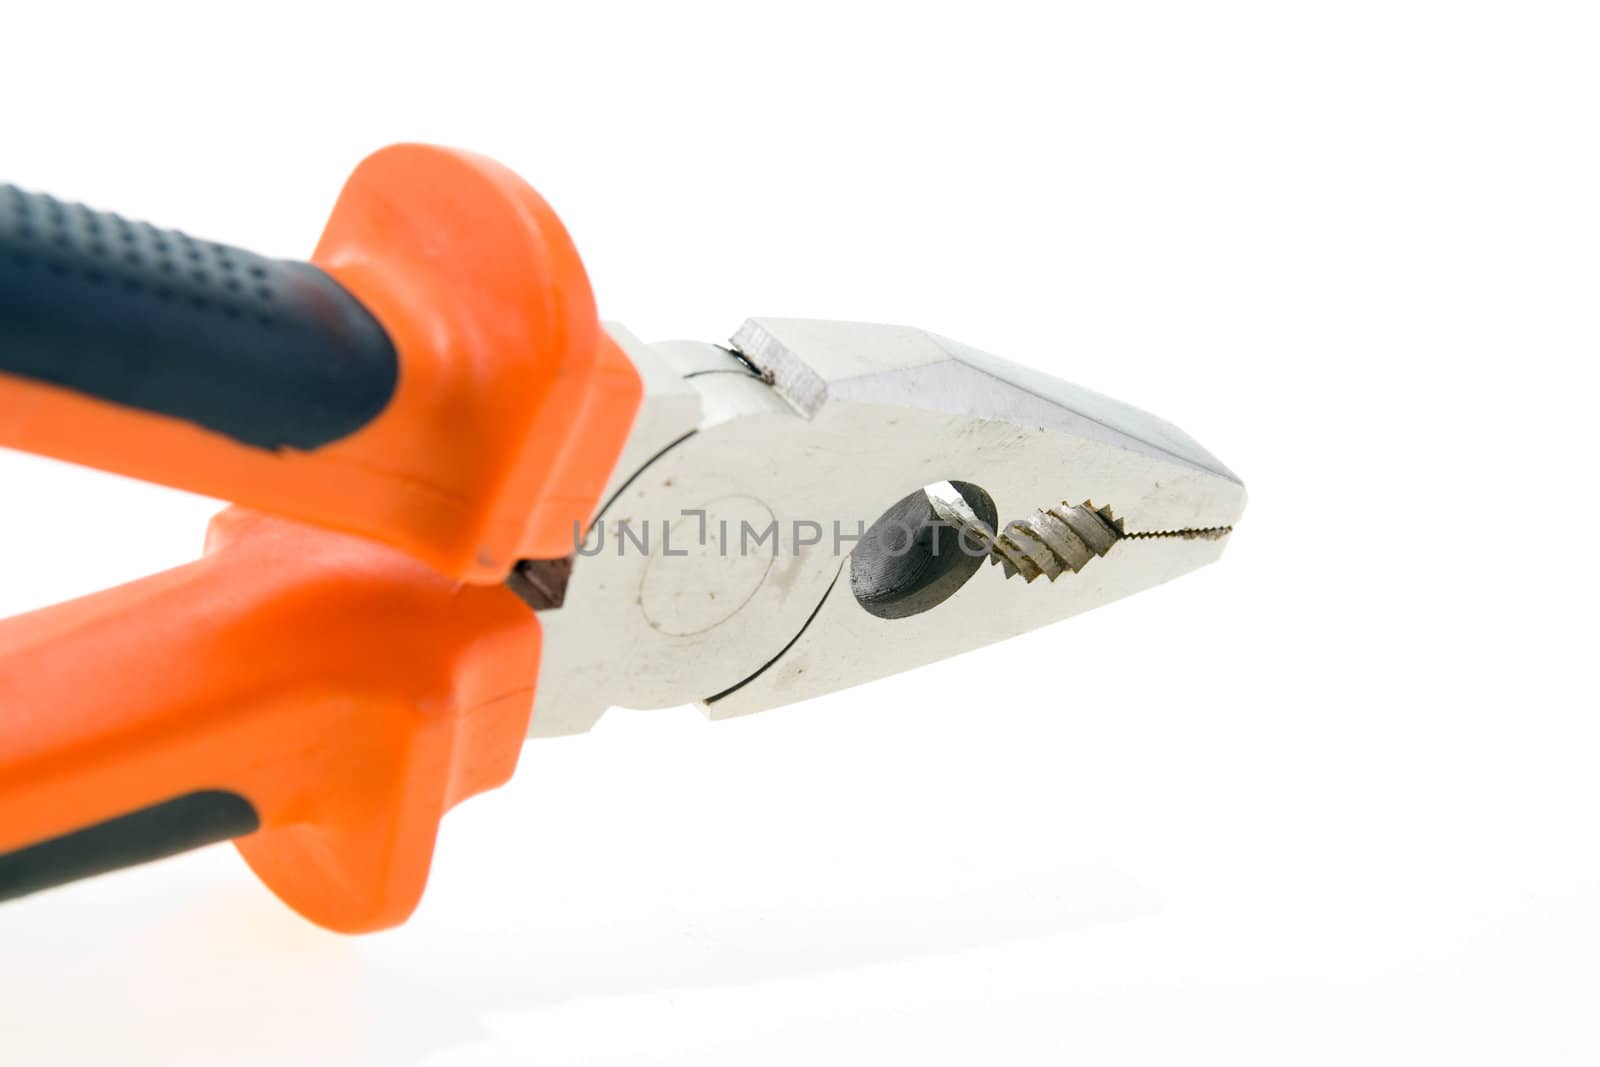 Steel used pliers with plastic color handles on a white background